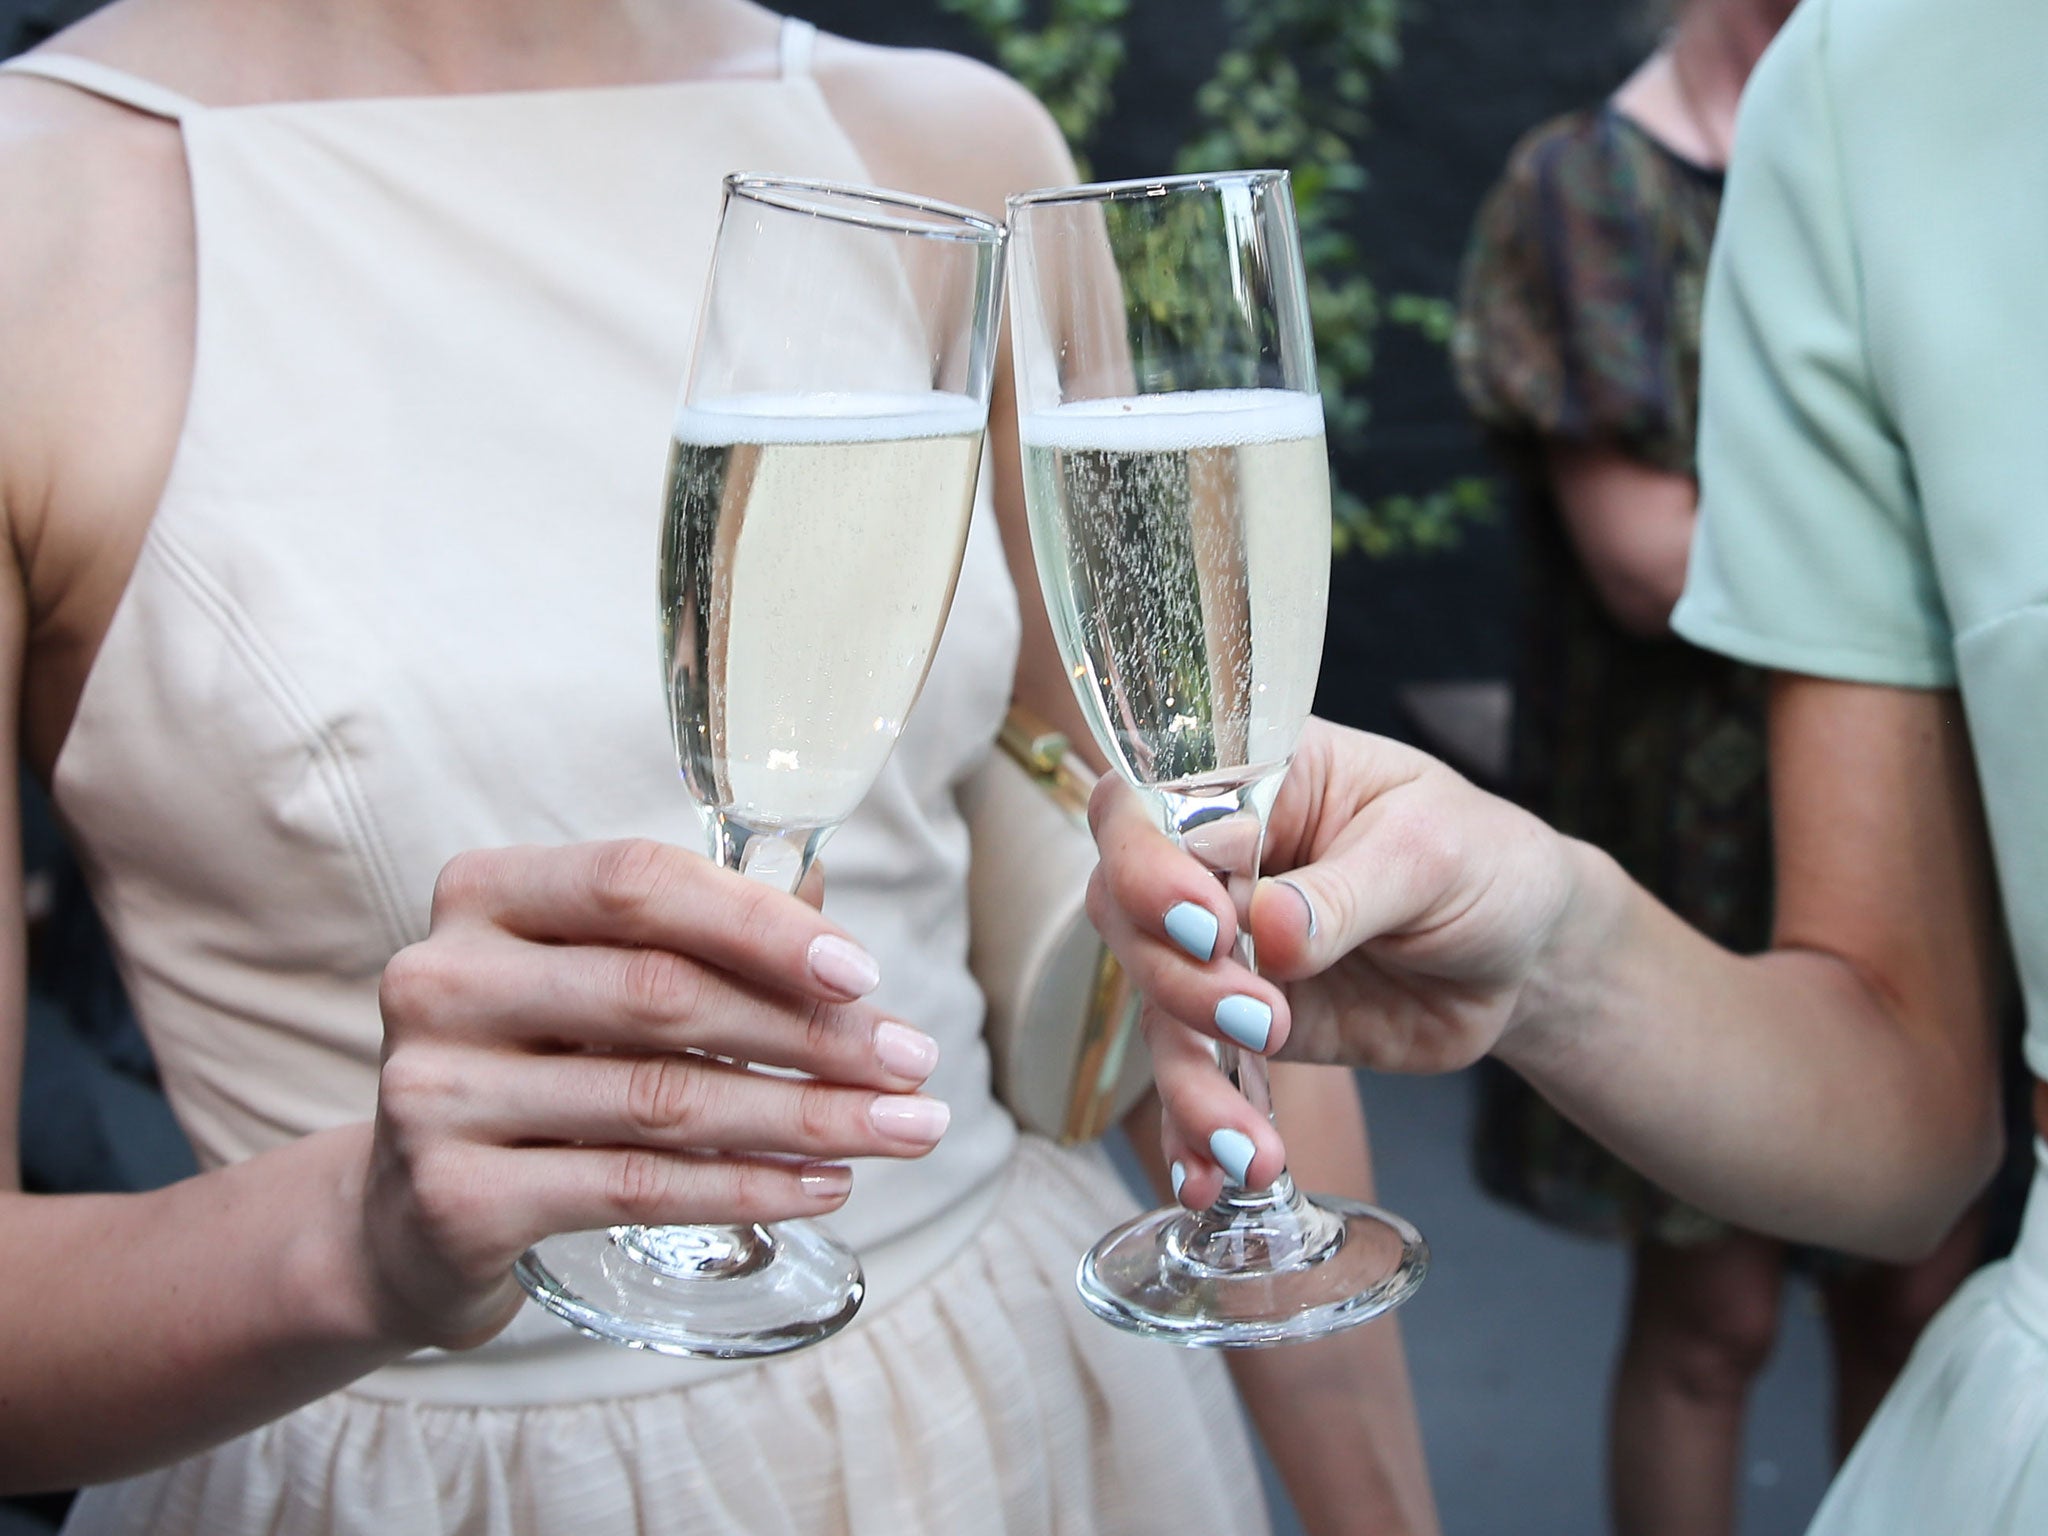 Prosecco on tap could soon be banned